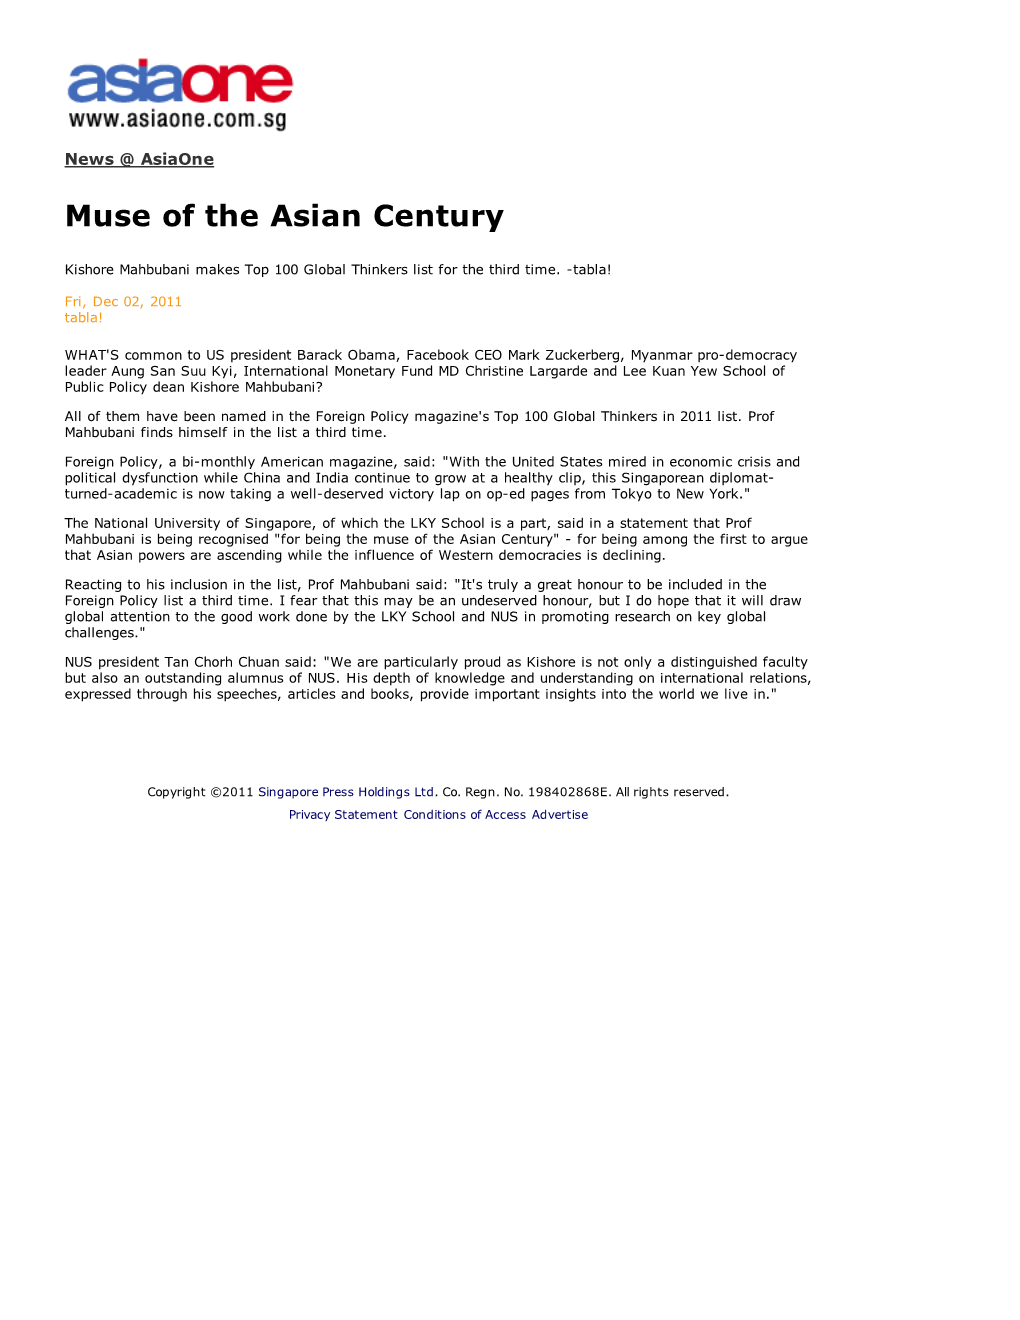 Muse of the Asian Century" - for Being Among the First to Argue That Asian Powers Are Ascending While the Influence of Western Democracies Is Declining